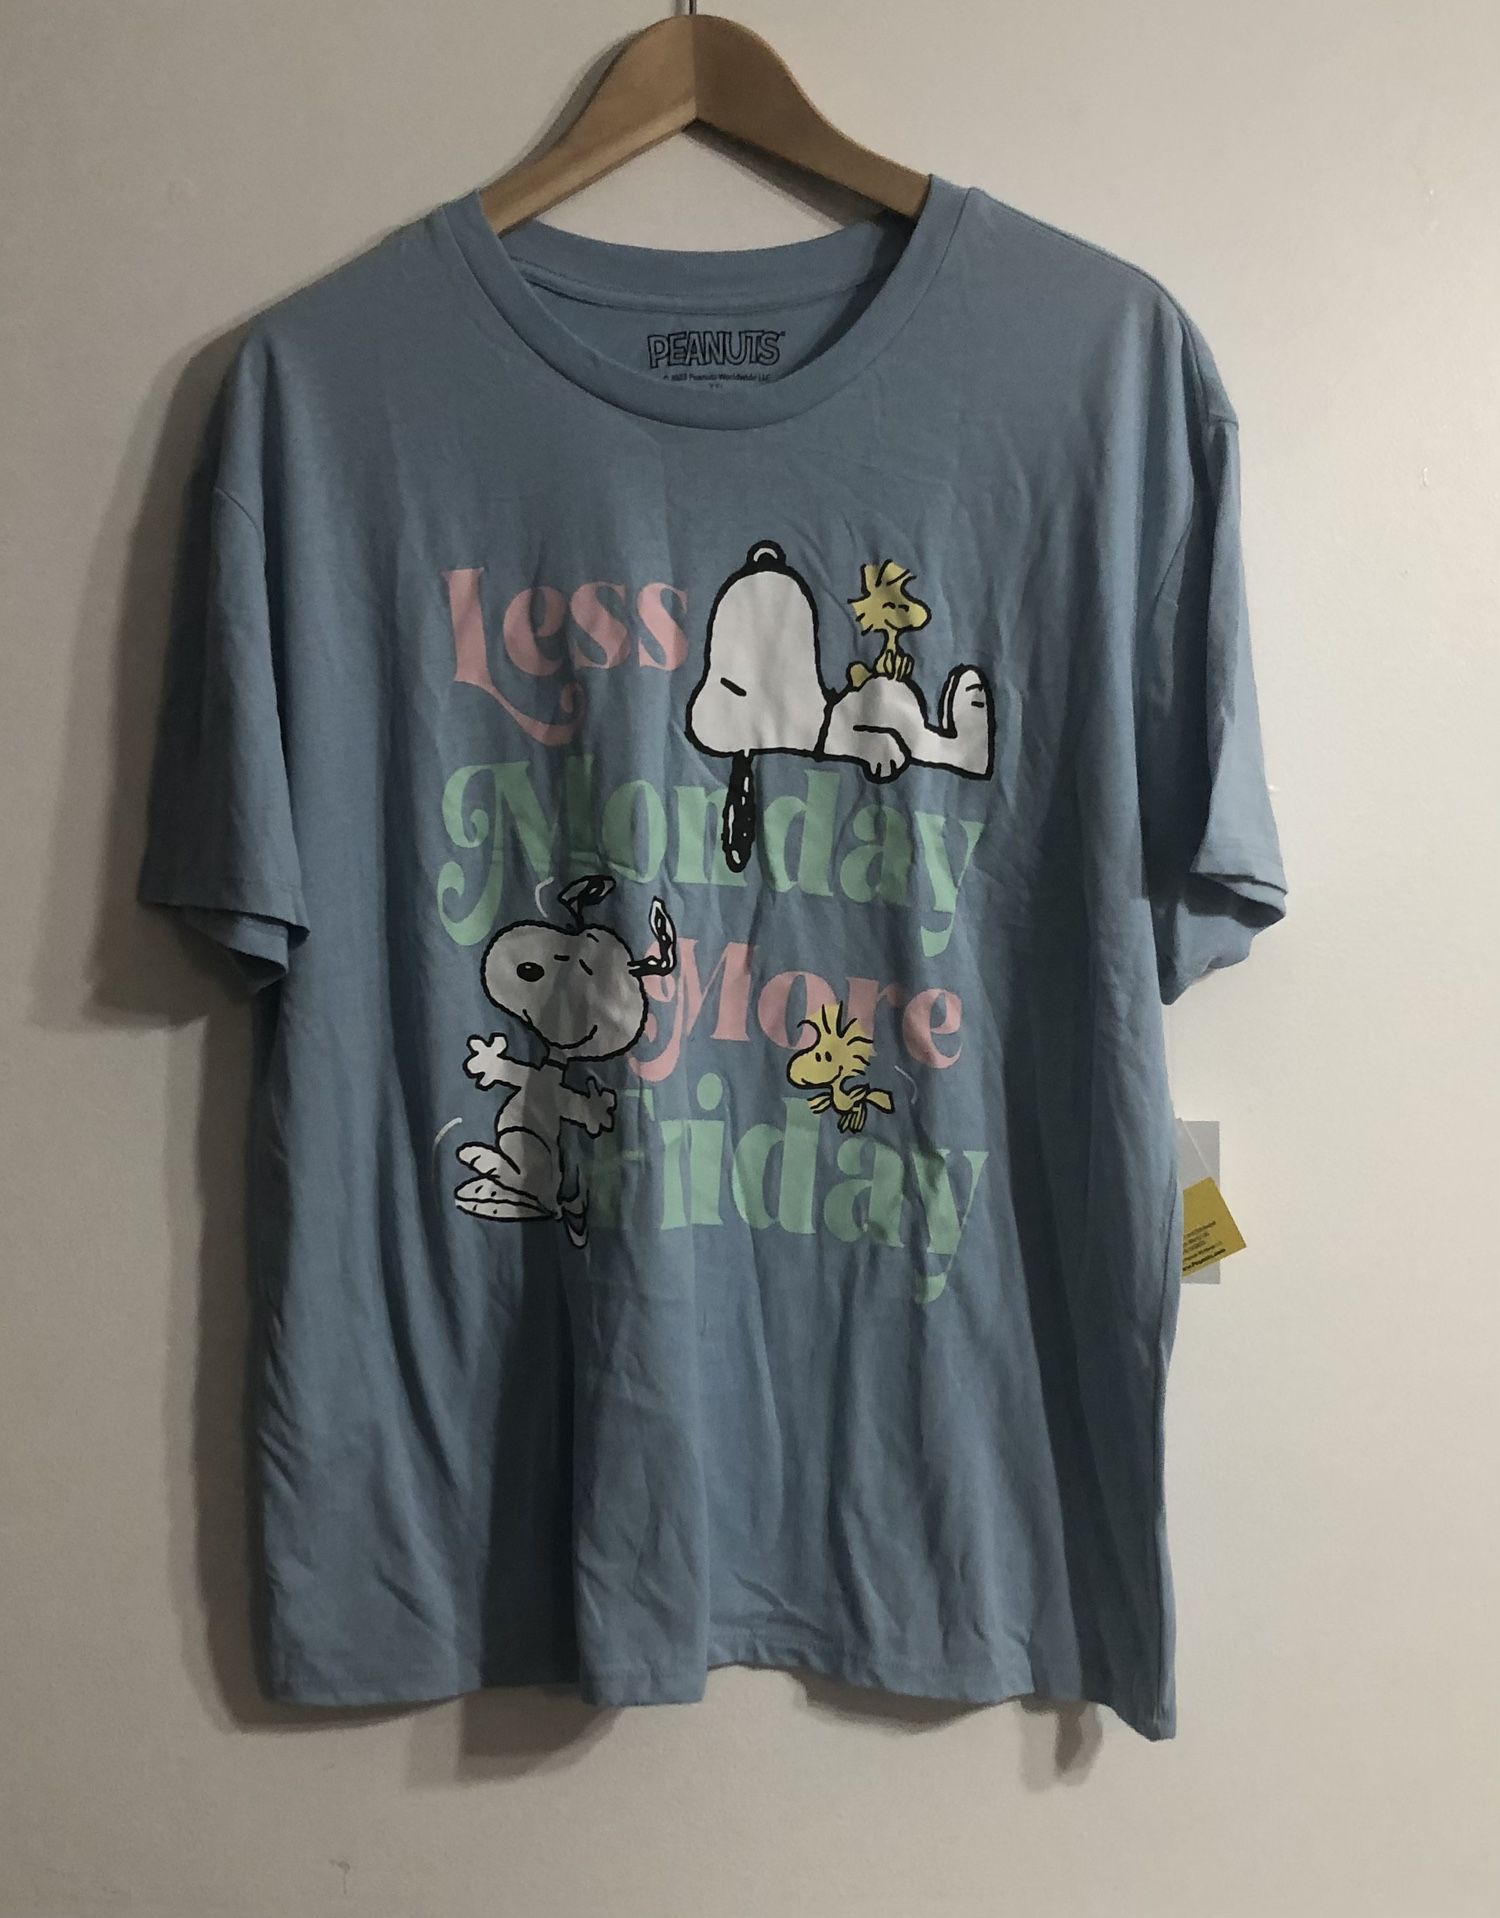 Peanuts women’s shirt Less snoopy Monday Peanuts More Friday graphics: crewneck, pull over, short sleeves, soft, relax,  comfortable,  lightweight fit